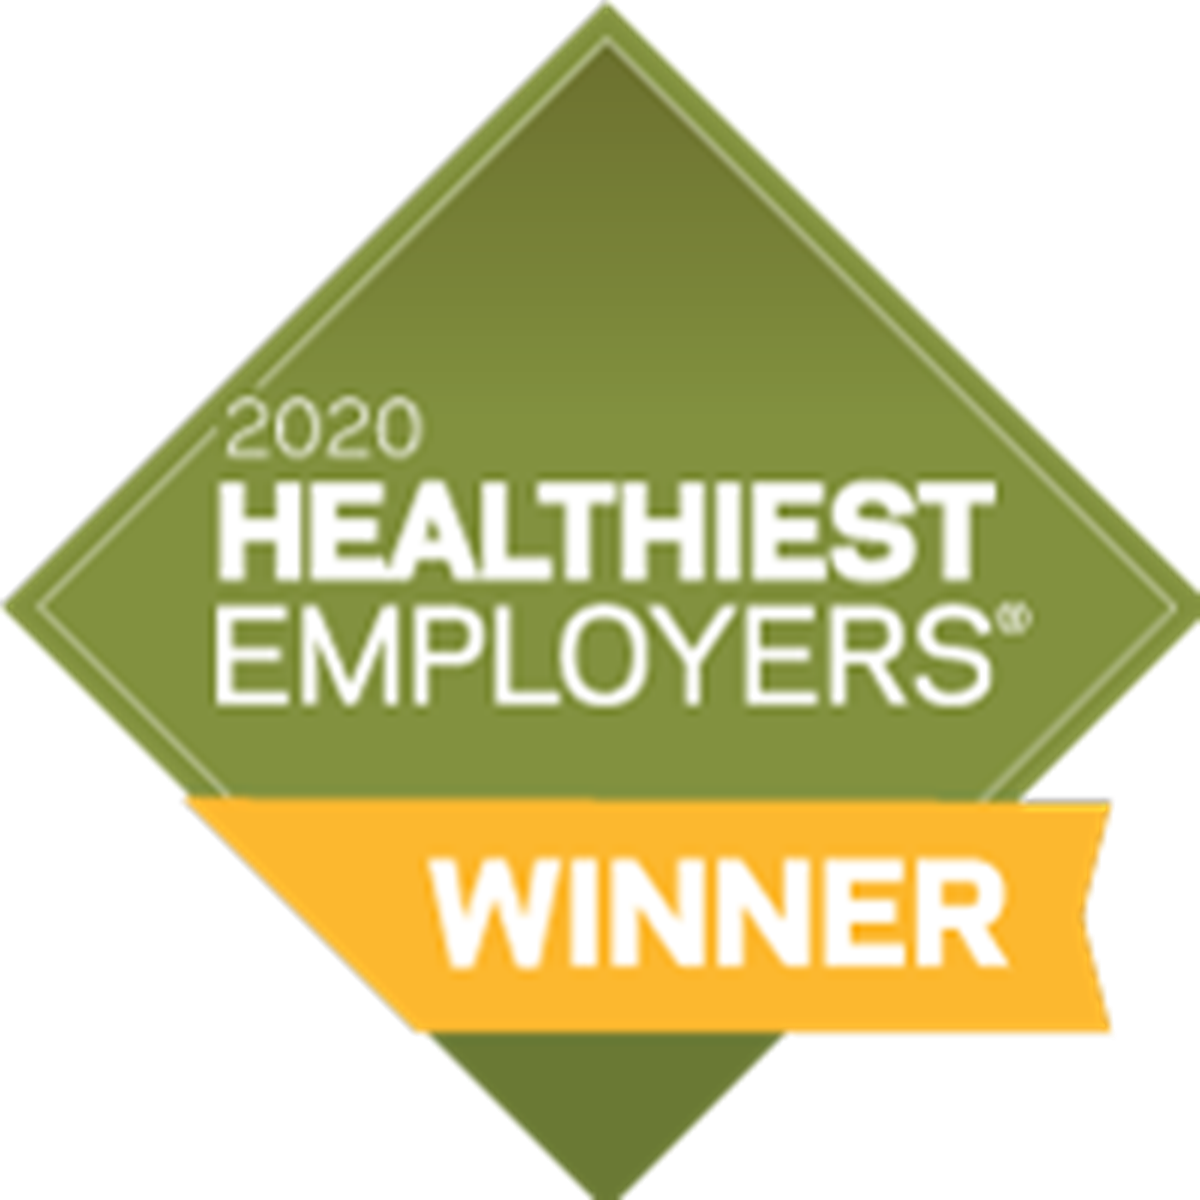 SCH ranked 19 among 2020 Top 100 Healthiest Workplaces in America